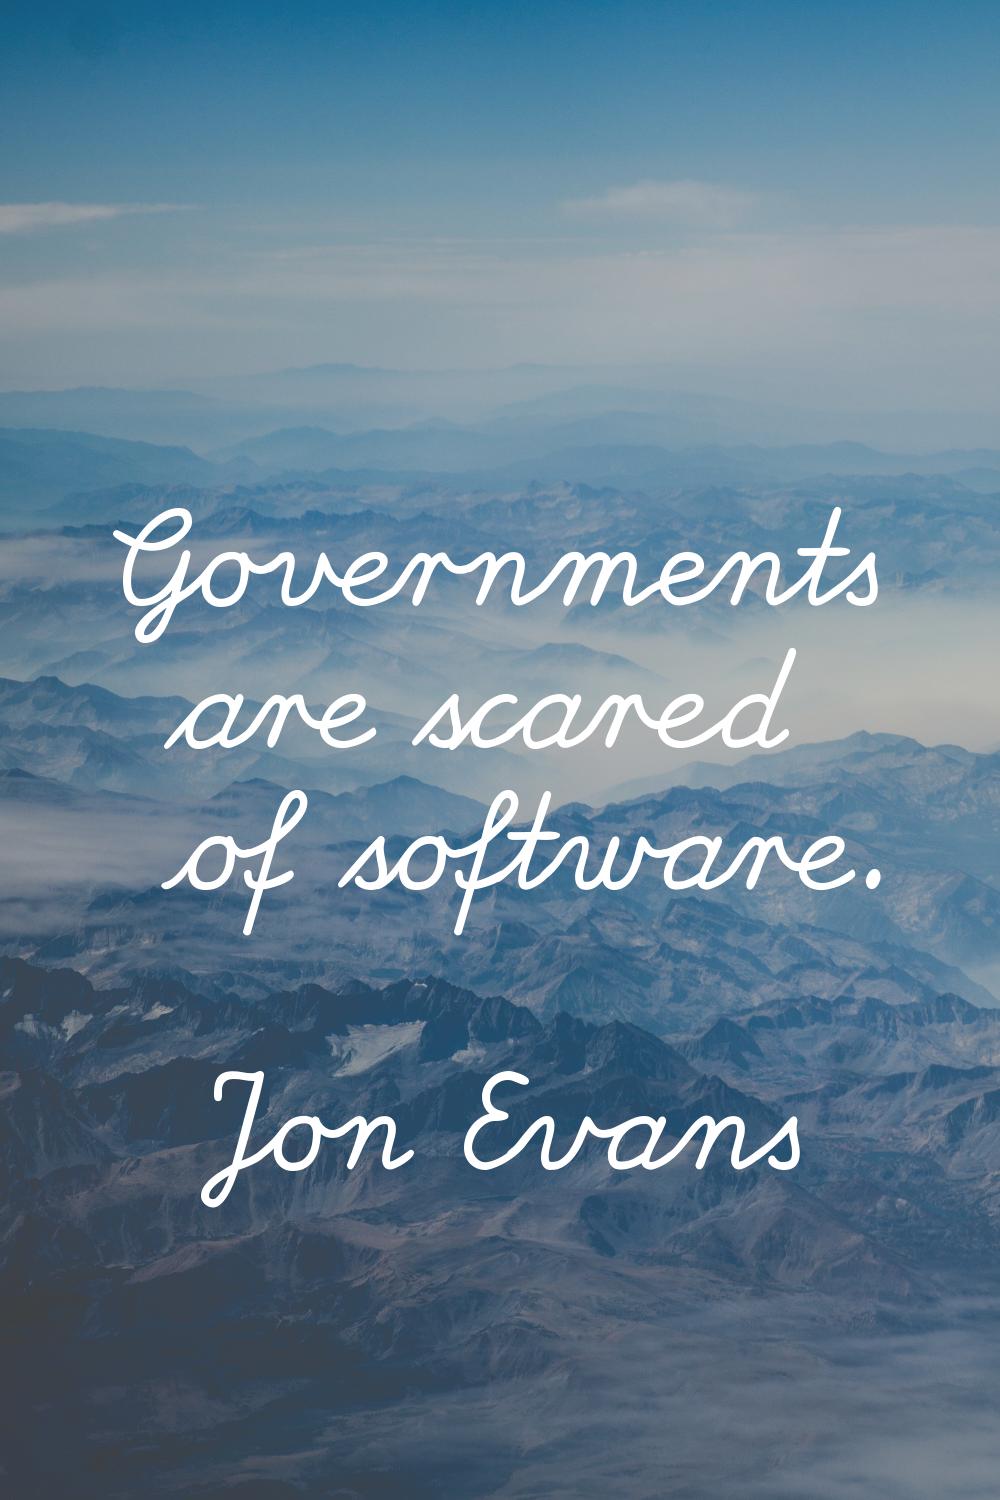 Governments are scared of software.